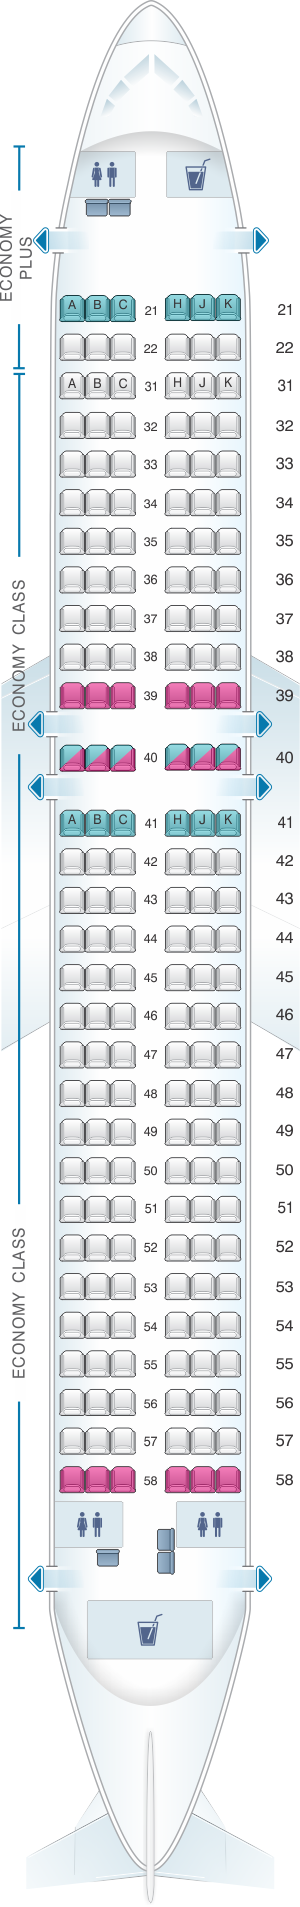 seat assignment pal